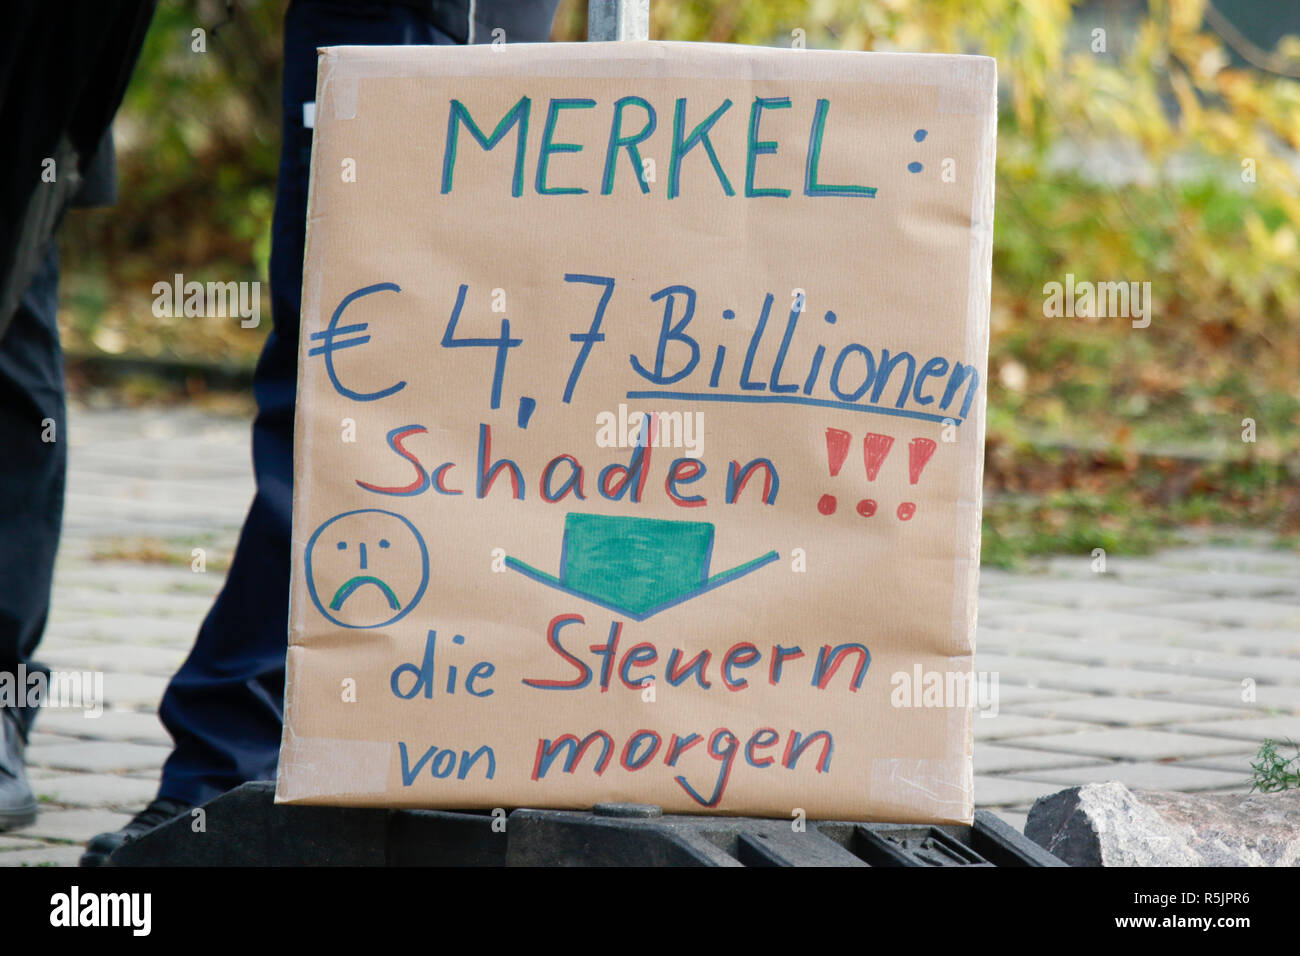 Kandel, Germany. 1st December 2018. A protester holds a sign that reads 'Merkel: 4,7 Billion damage!!! The taxes of tomorrow'. Around 250 people from right-wing organisations protested in the city of Kandel in Palatinate against the German government. They also adopted the yellow vests from the French yellow vest protest movement. The place of the protest was chosen because of the 2017 Kandel stabbing attack, in which a 15 year old girl was killed by an asylum seeker. They were confronted by anti-fascist counter-protesters from different political parties and organisations. Credit: Michael Deb Stock Photo